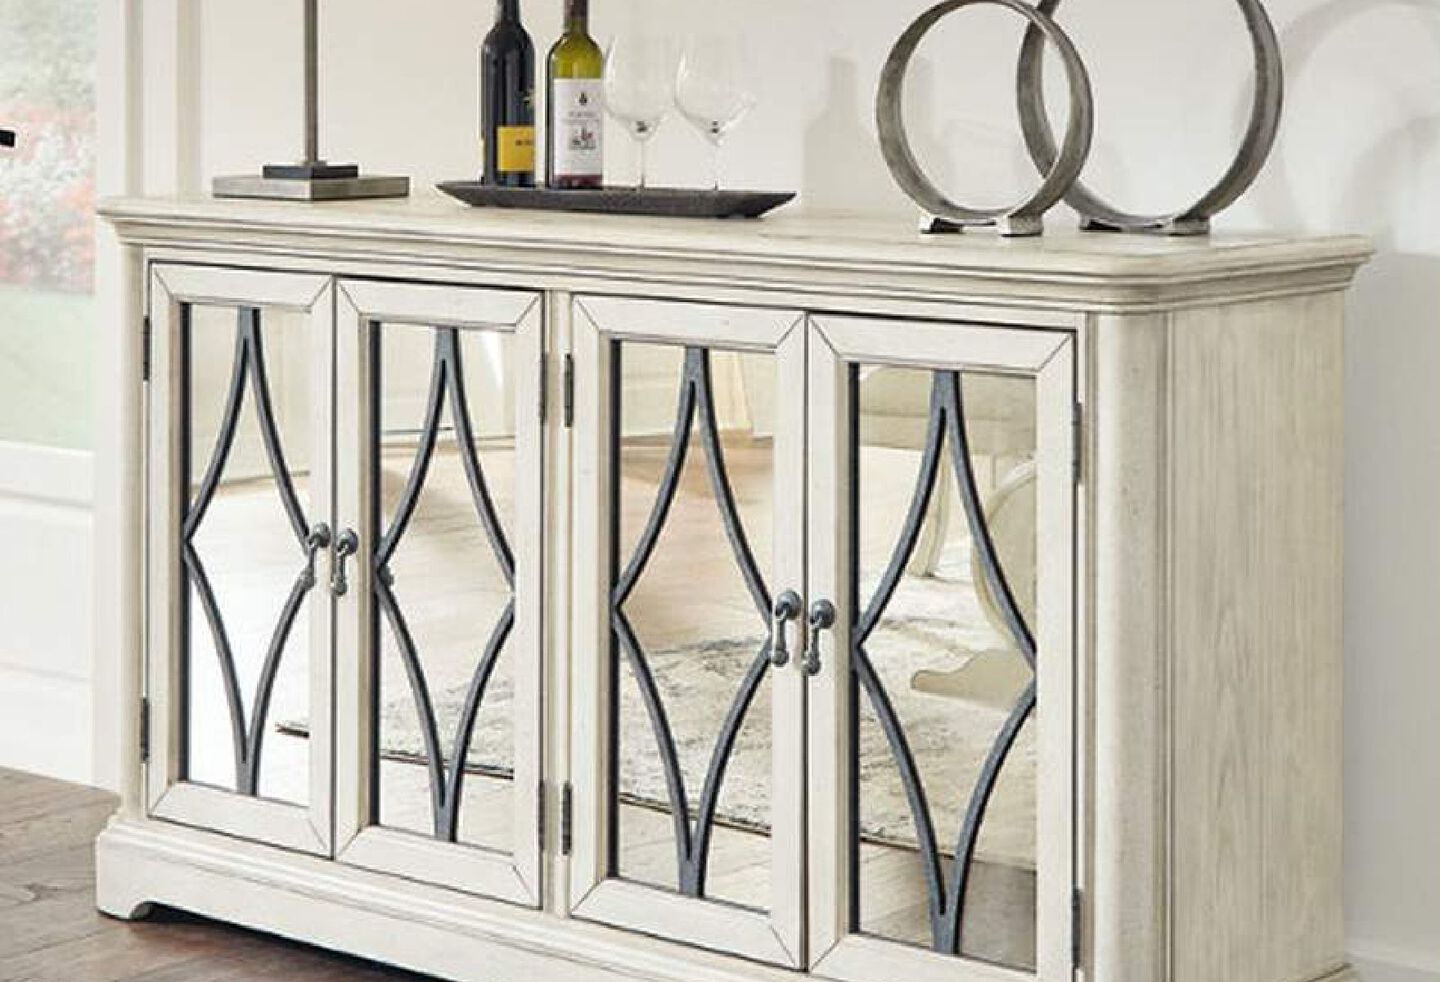 White wooden dining server with mirrors and detailing on the cabinet doors